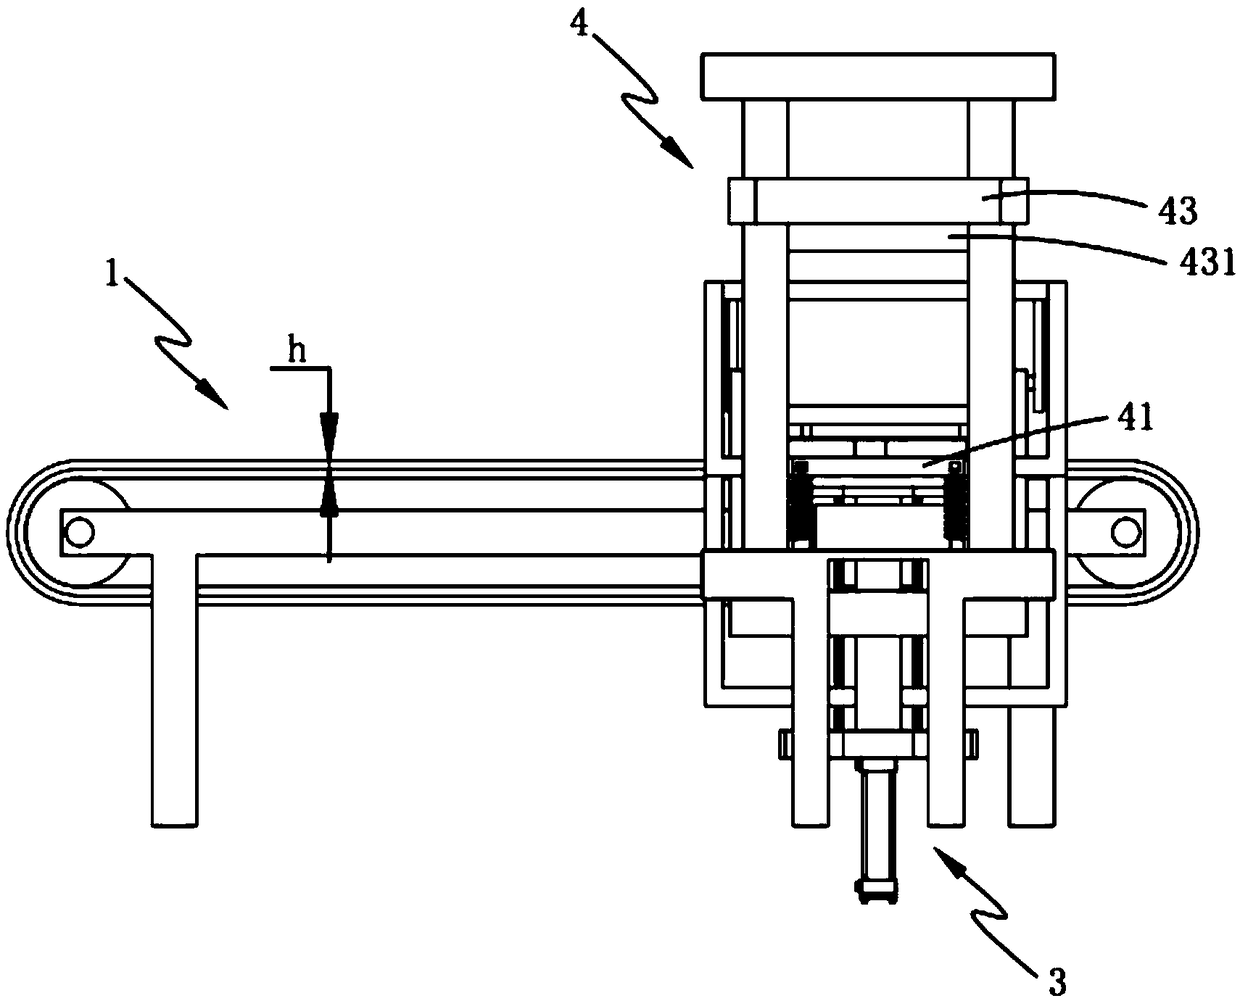 Semiautomatic continuous assembly machine for electromagnetic clutches